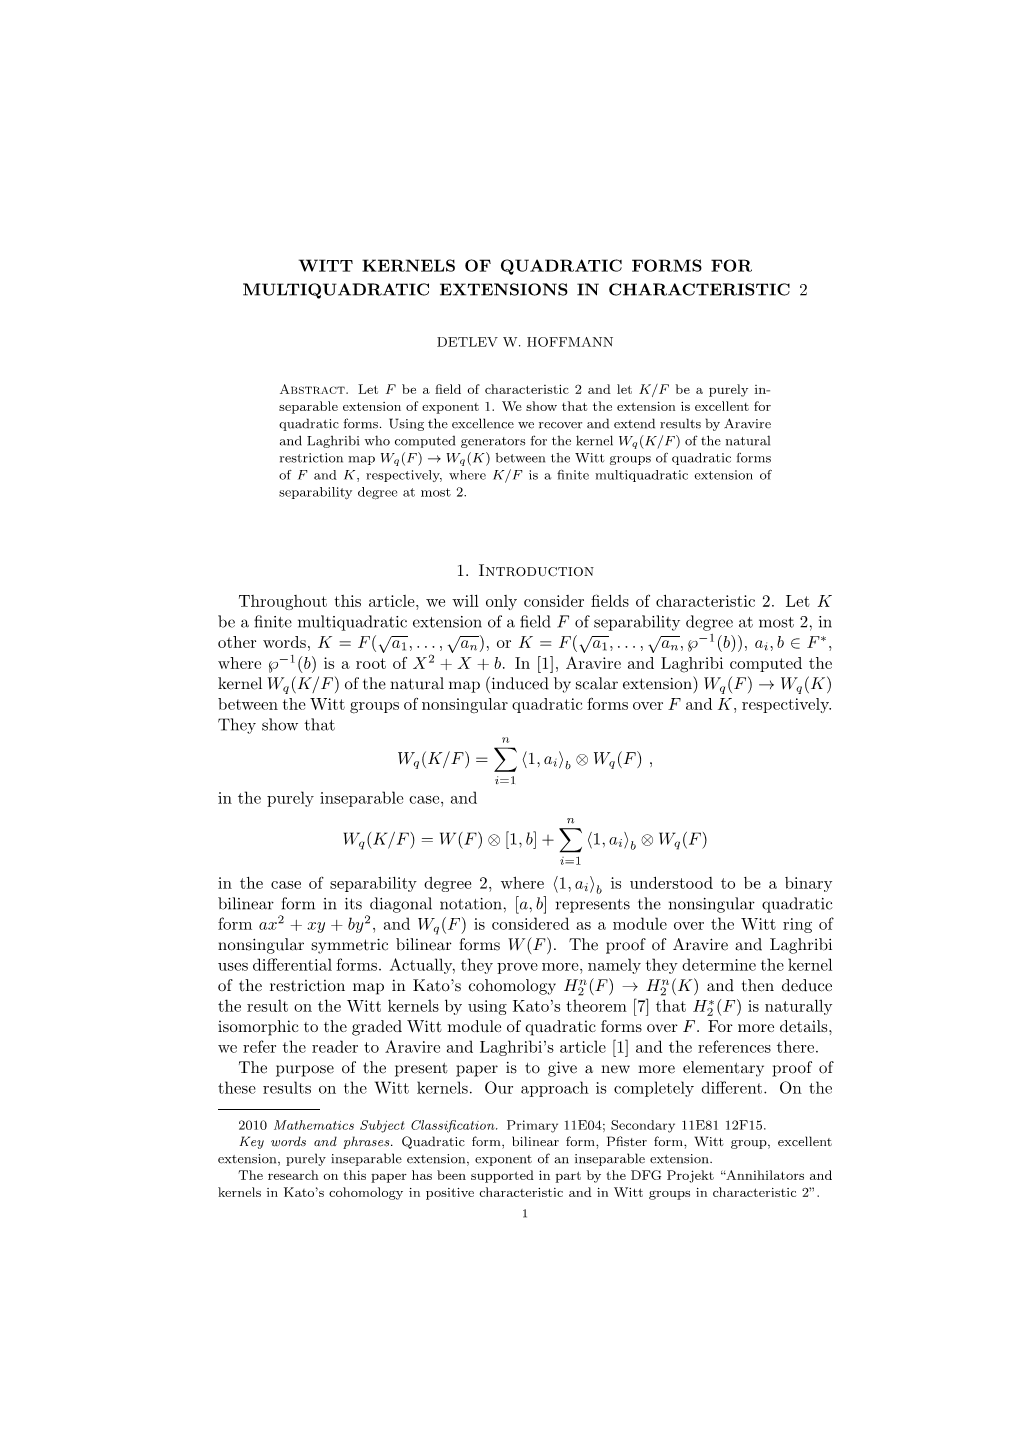 Witt Kernels of Quadratic Forms for Multiquadratic Extensions in Characteristic 2